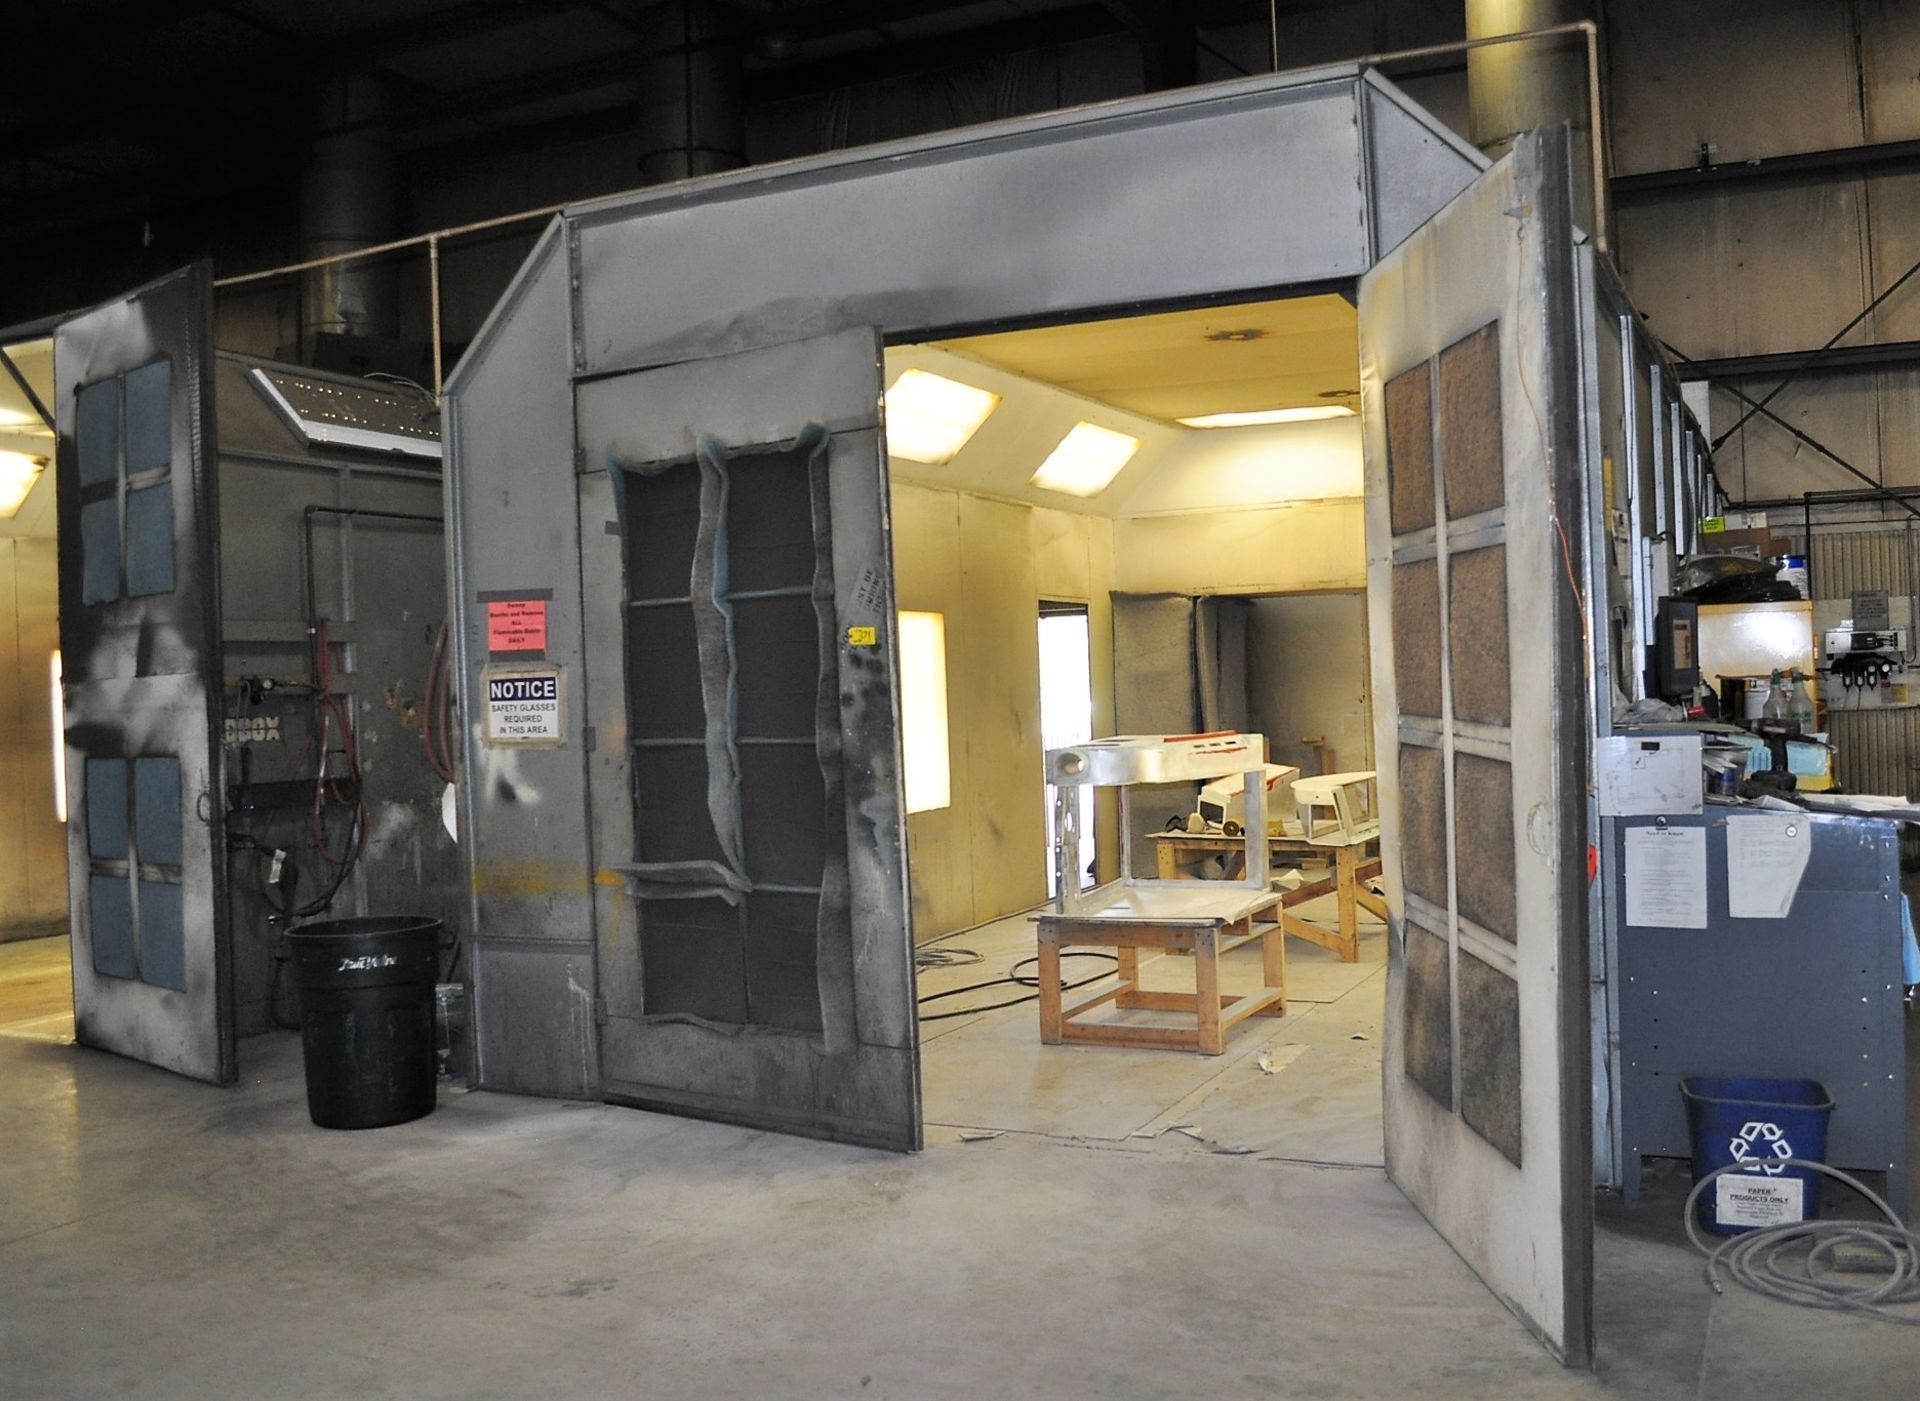 14' WIDE X 27' LONG X 12' HIGH PAINT BOOTH, DOUBLE DOOR, REAR EXHAUST SYSTEM